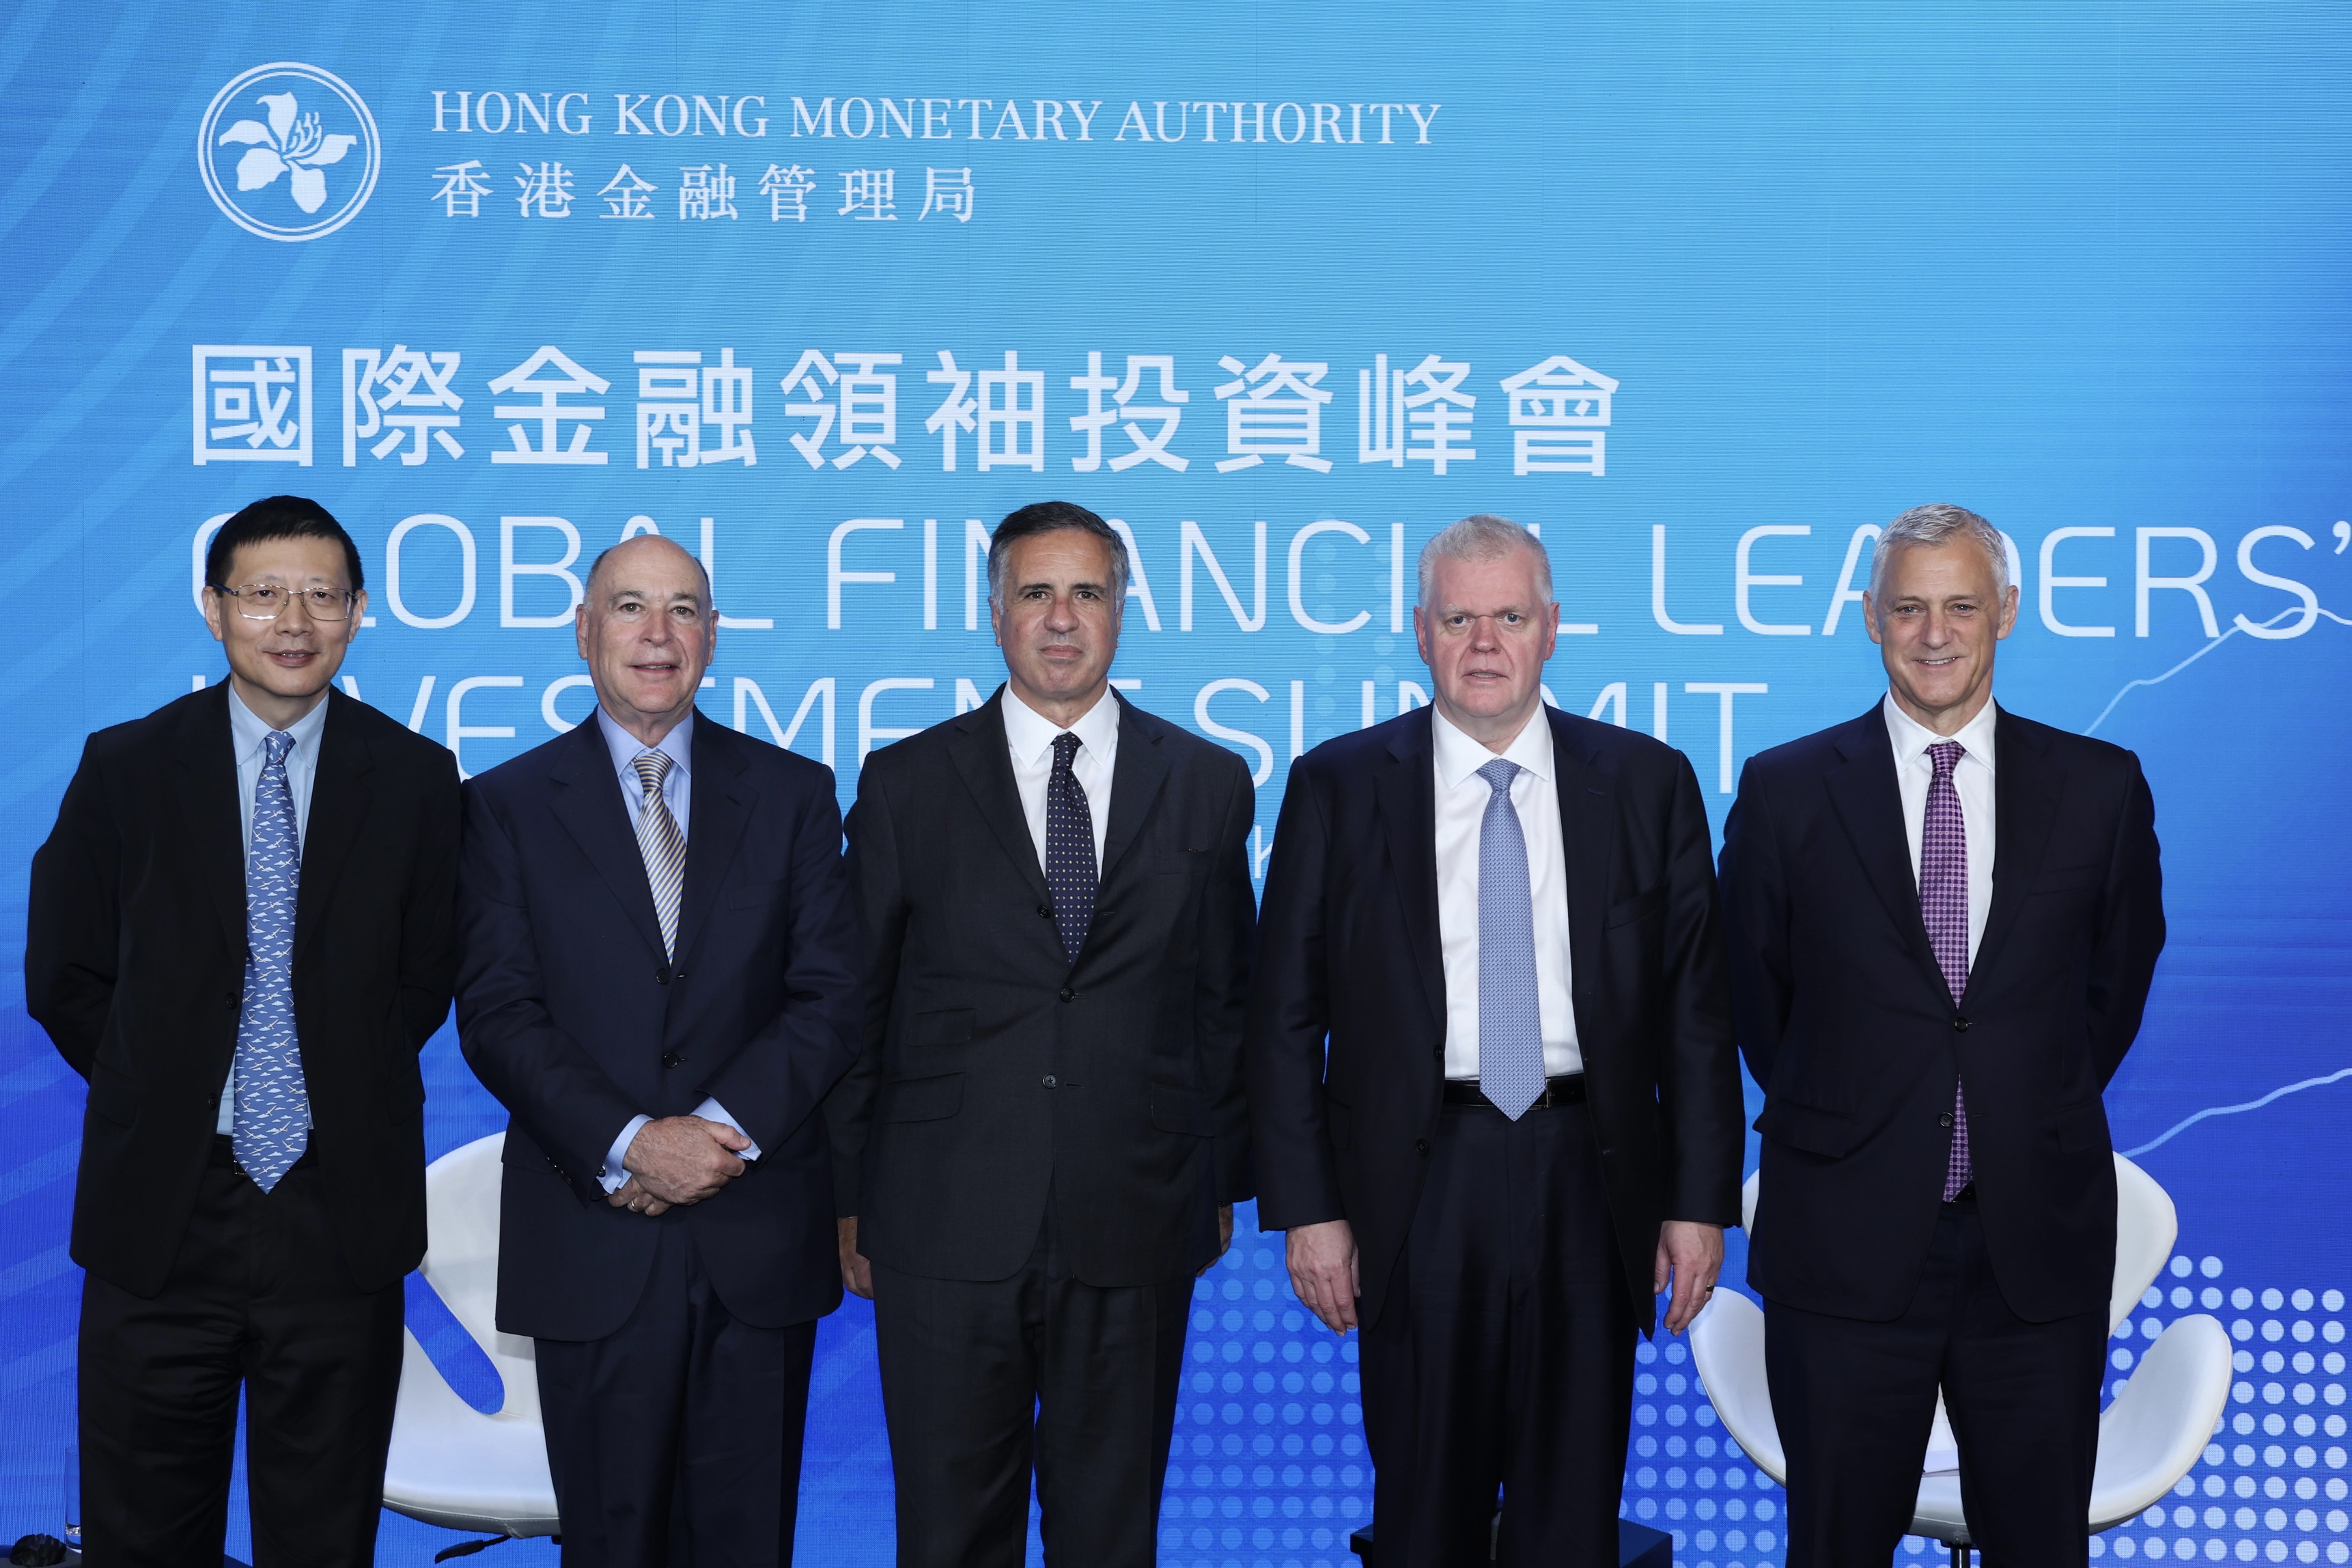 (From left to right) Neil Shen, Founding & Managing Partner of Sequoia China; Rob Kapito, President of BlackRock; Daniel Pinto, President and Chief Operating Officer of JPMorgan Chase;
Noel Quinn, Group Chief Executive of HSBC; Bill Winters, Group Chief Executive of Standard Chartered
